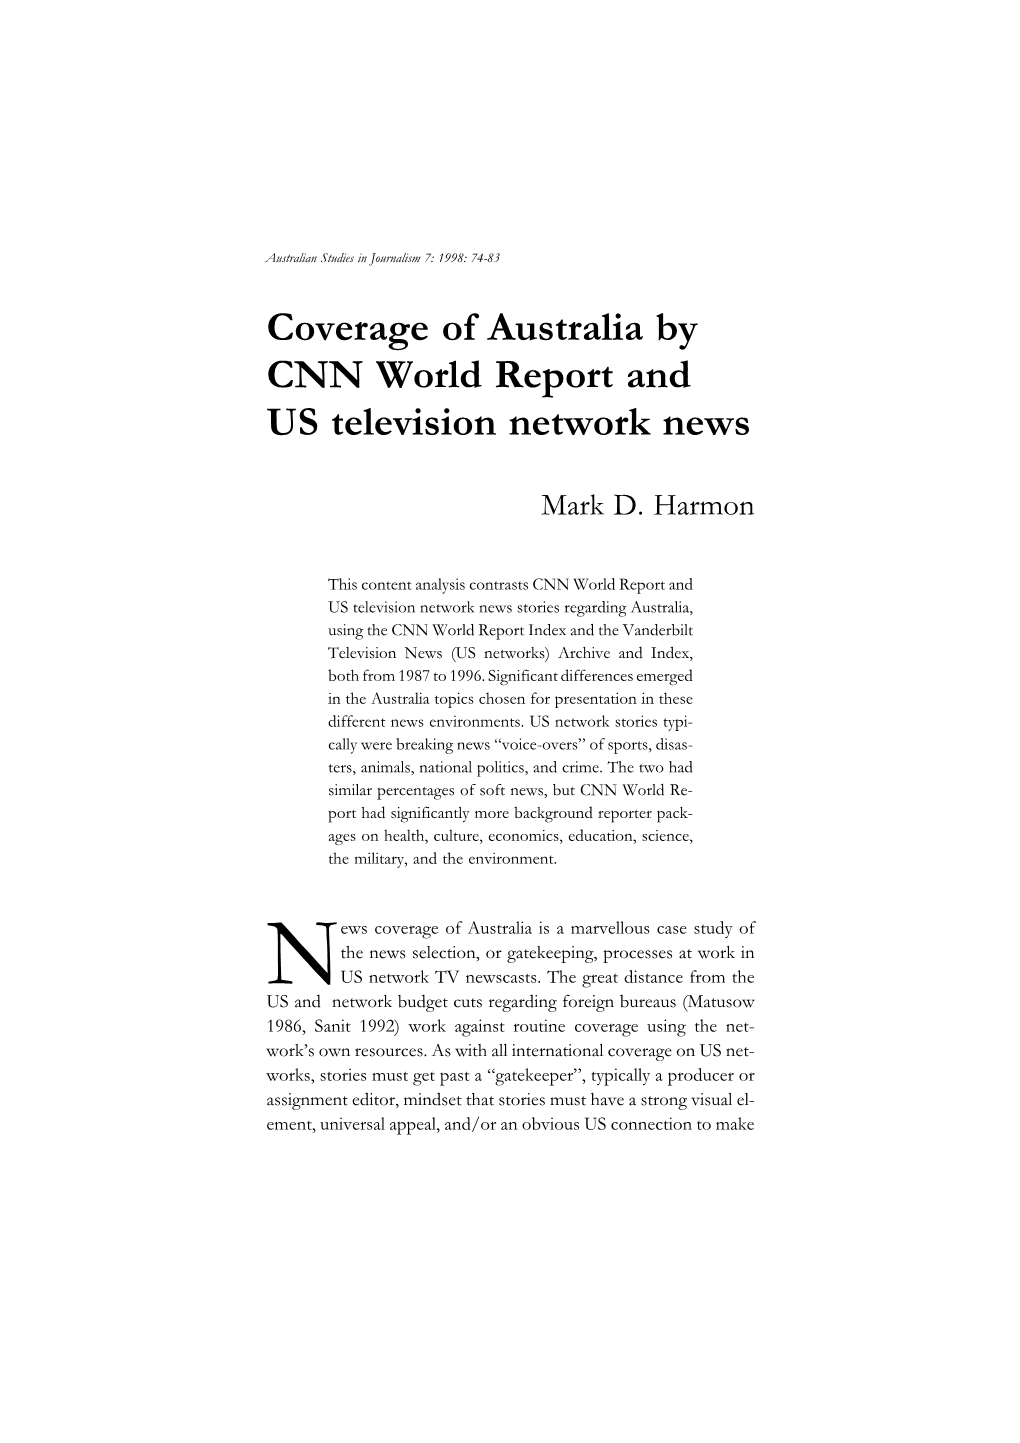 Coverage of Australia by CNN World Report and US Television Network News